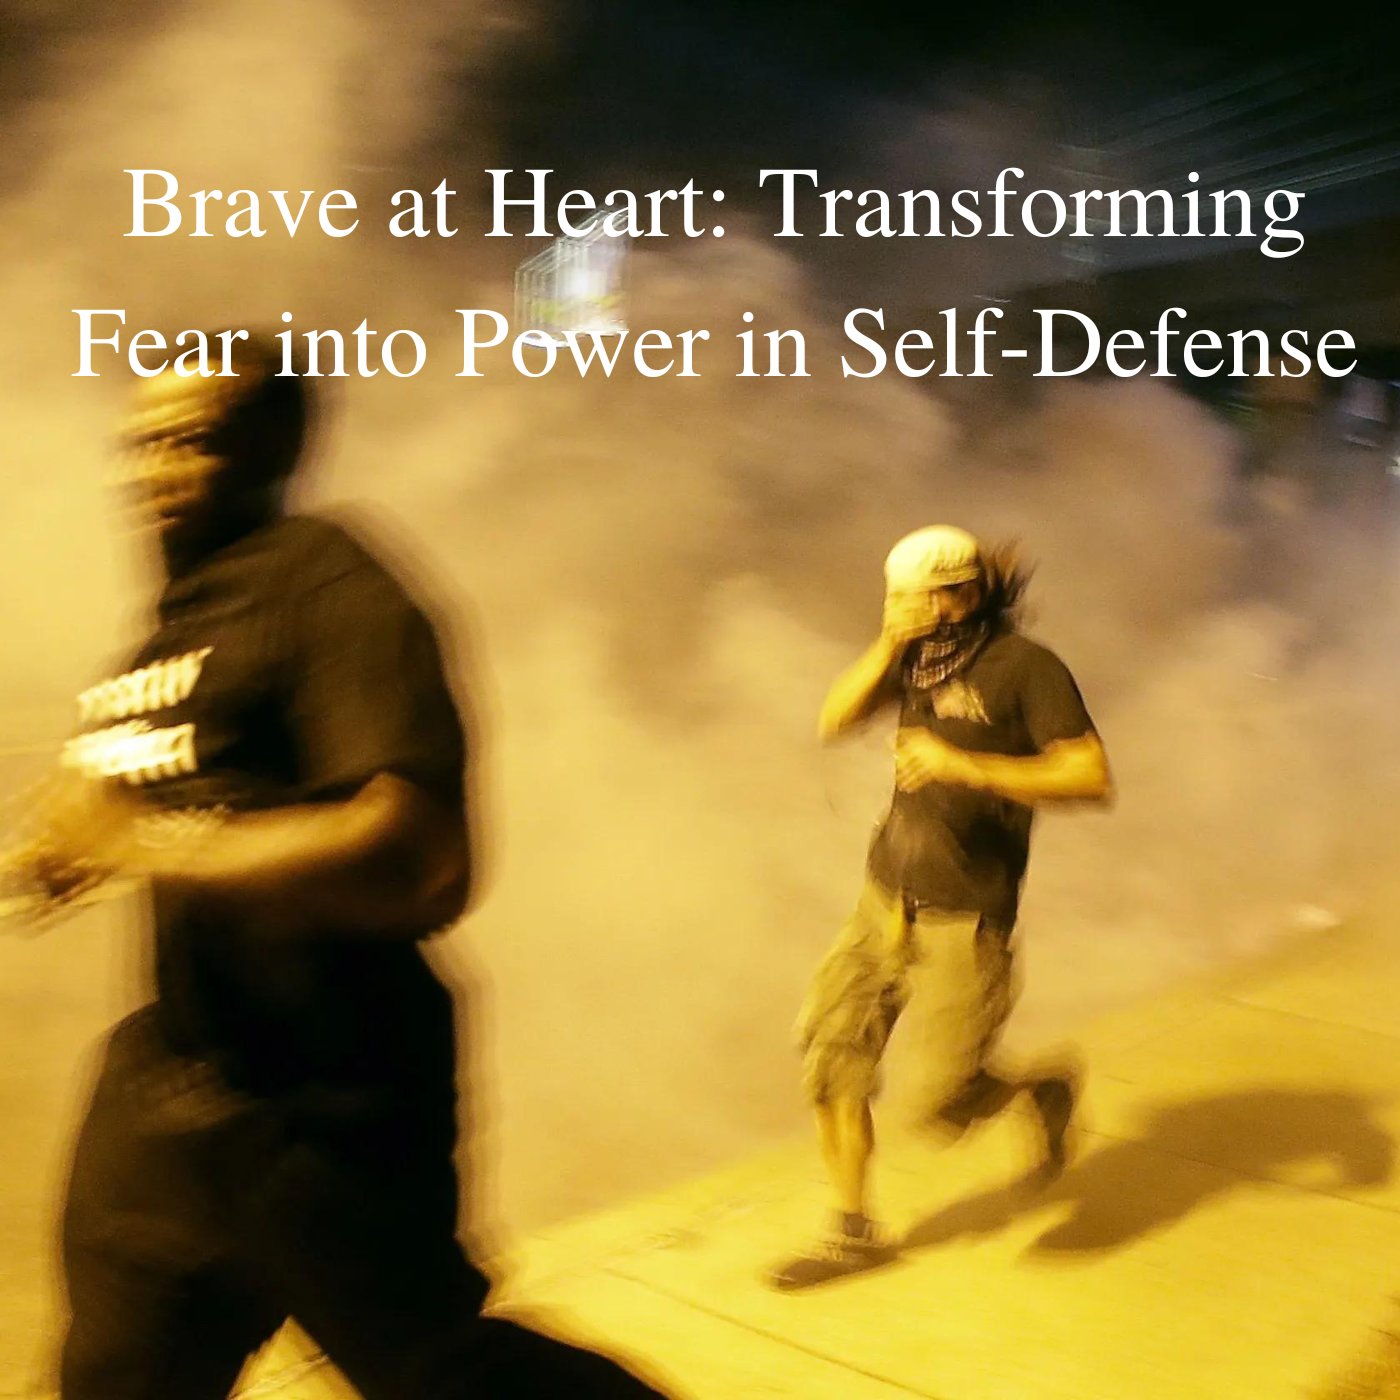 Brave at Heart: Transforming Fear into Power in Self-Defense